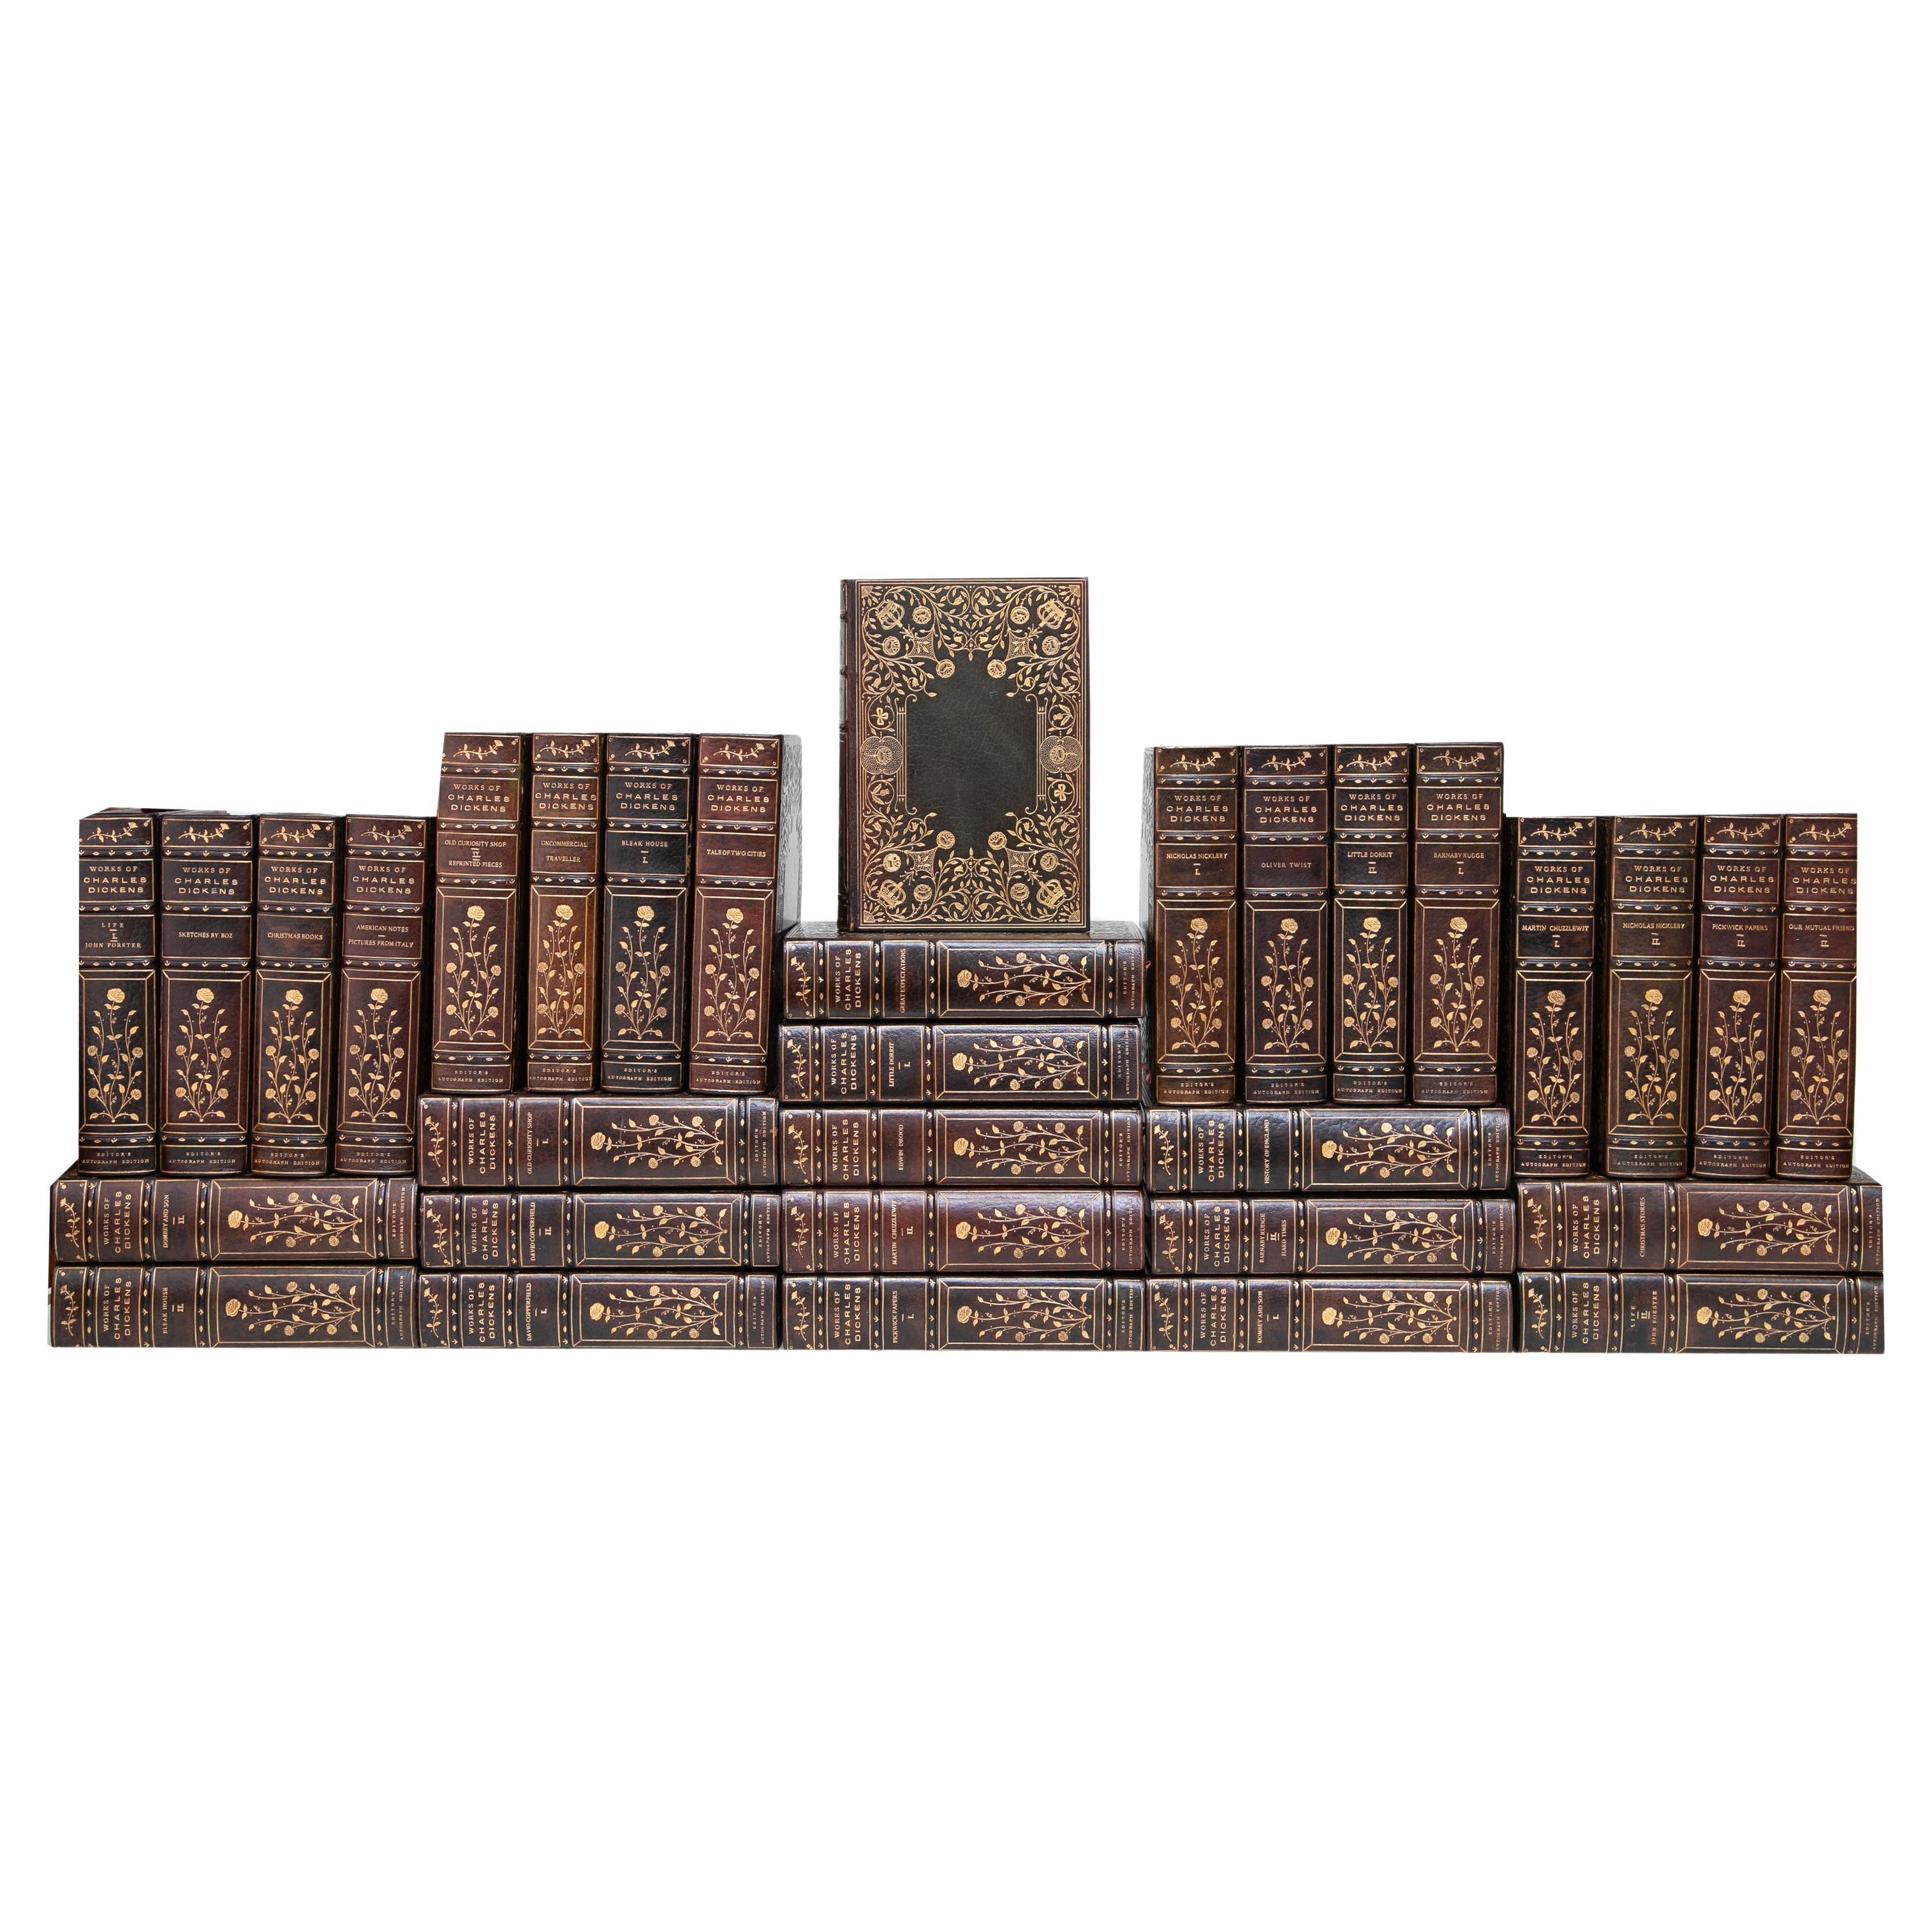 32 Volumes. Charles Dickens, The Works.